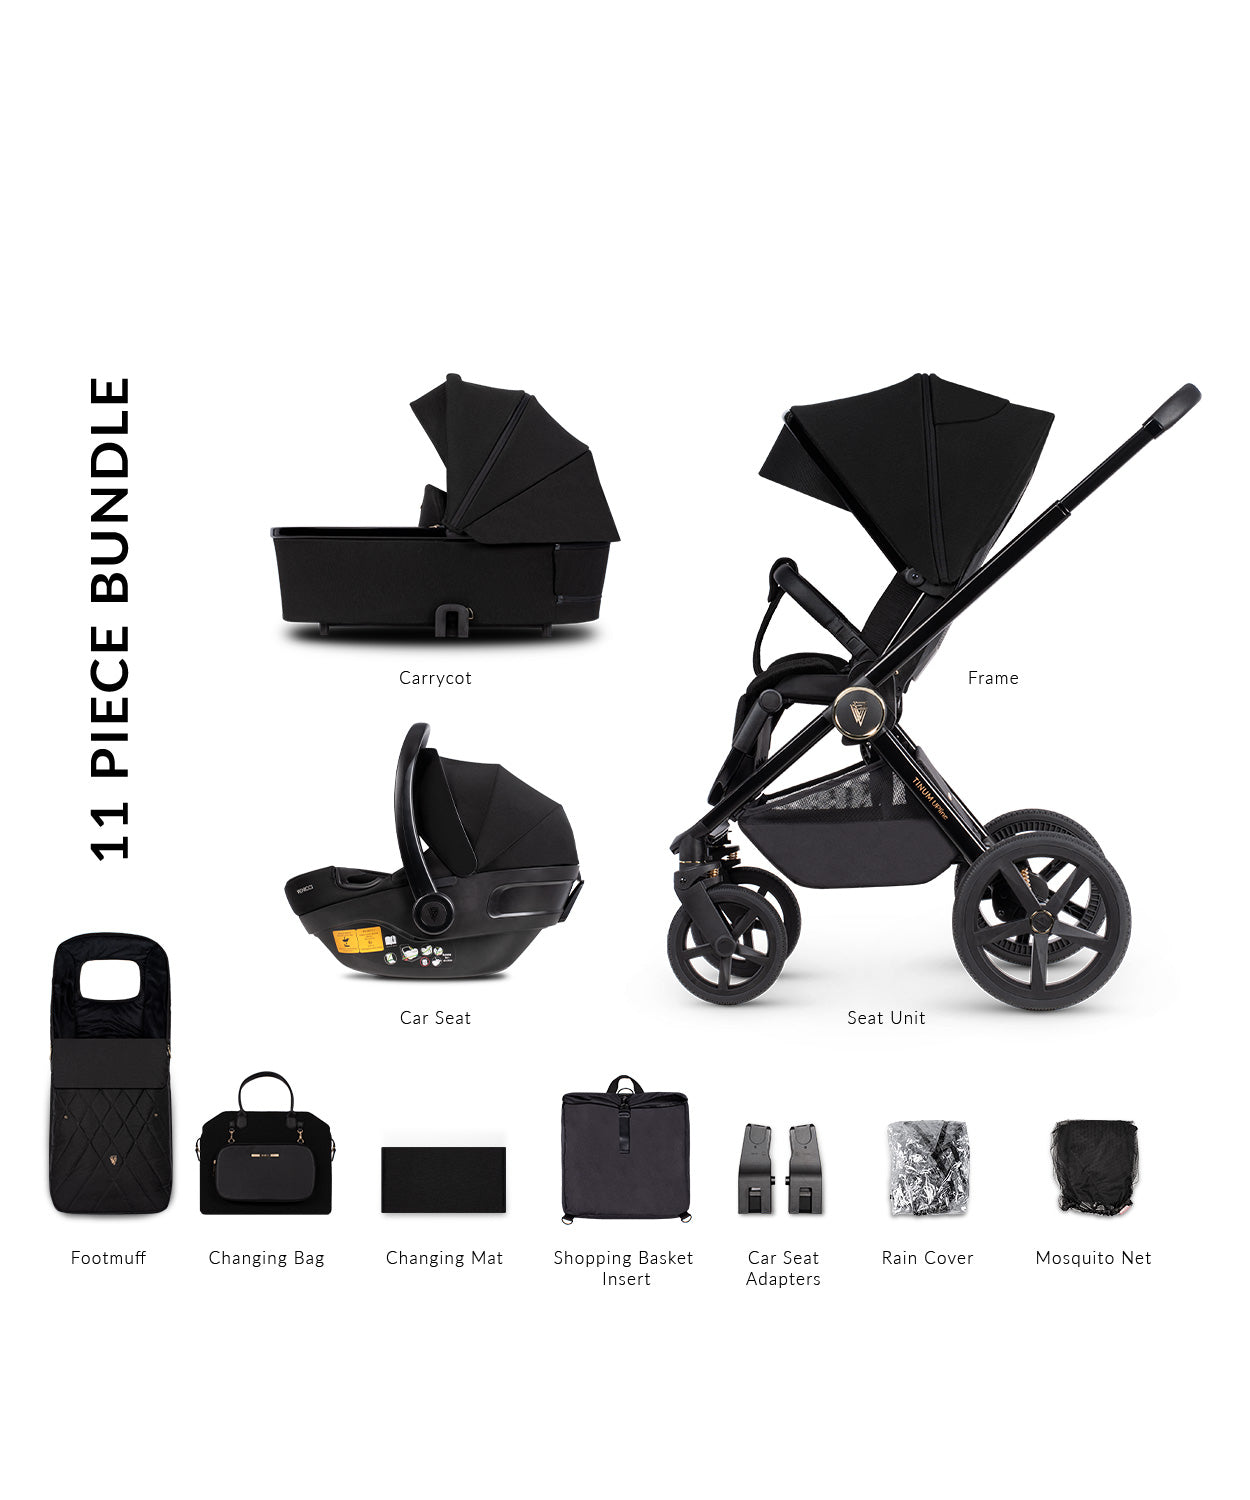 Venicci Tinum Upline 3 In 1 Travel System - All Black - For Your Little One